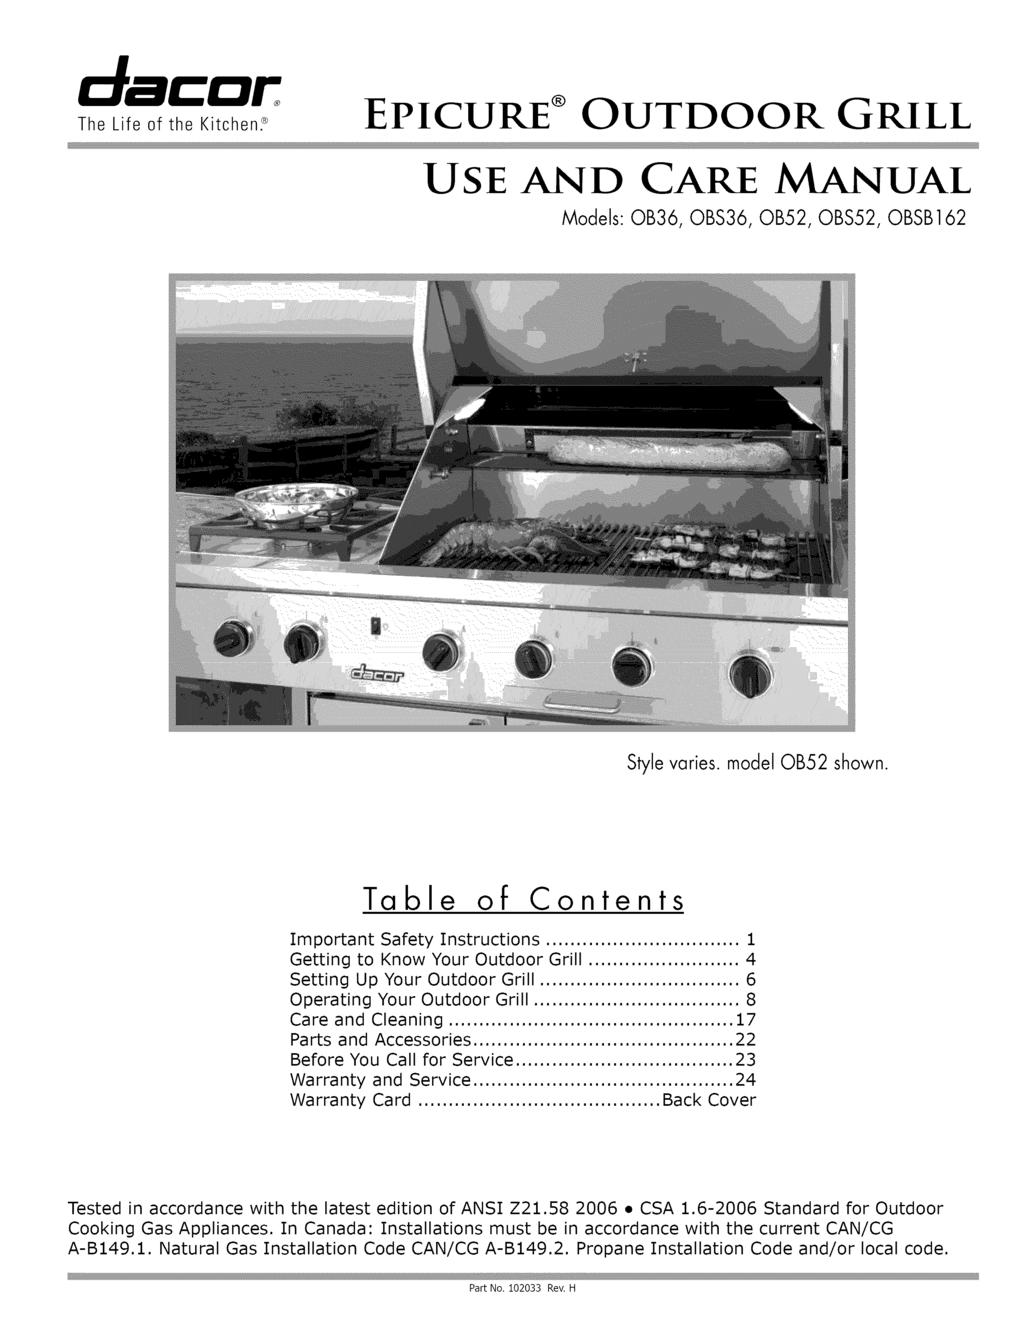 The Life of the Kitchen2 EPICURE OUTDOOR GRILL U SE AND CARE MANUAL Models: 0B36 0BS36 0B52 0BS52 OBSB162 Style varies model 0B52 shown. Table of Contents Important Safety Instructions.